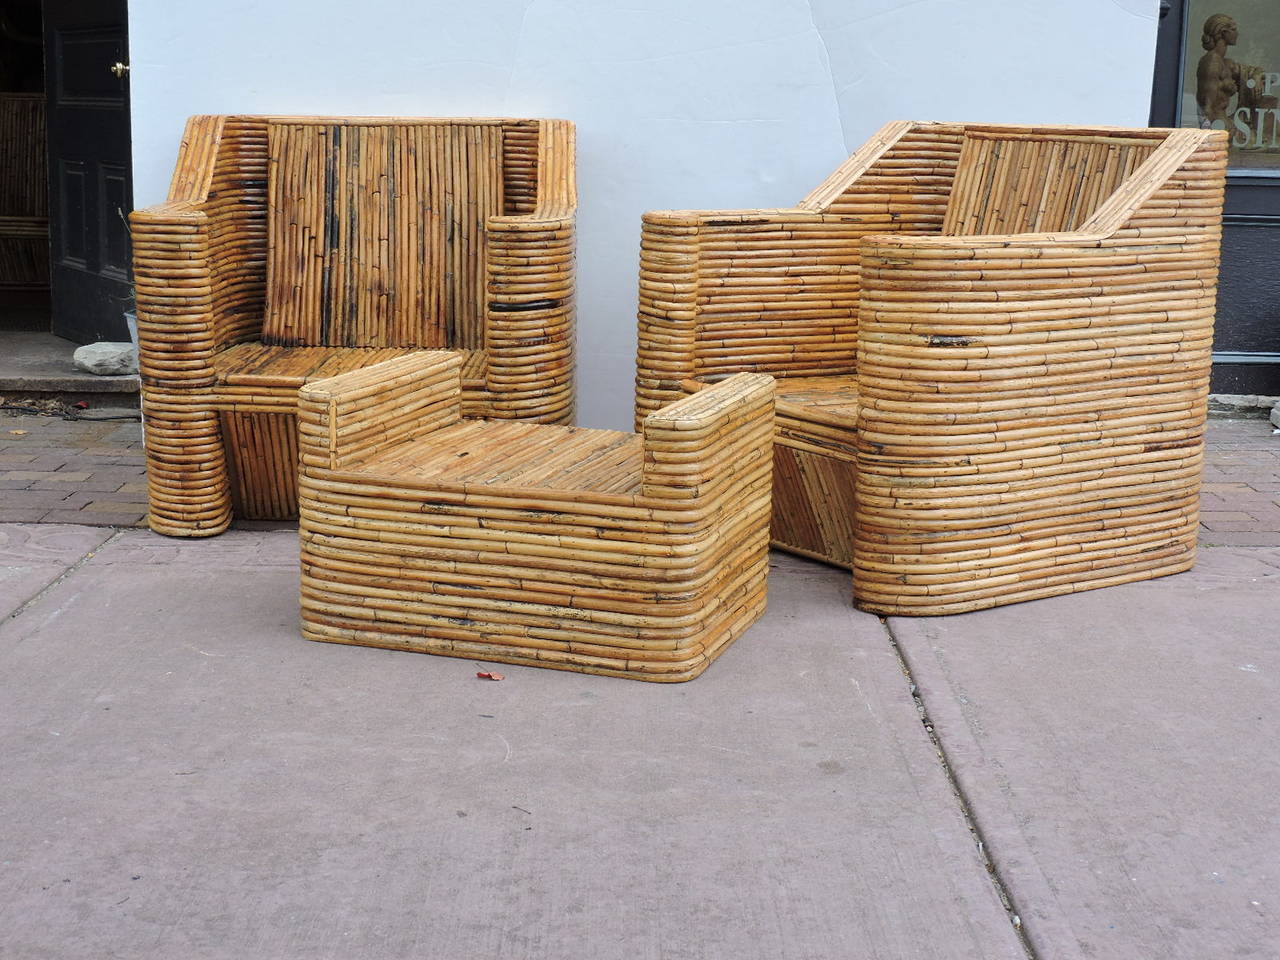 Dating from the 1970s - a spectacular large scale seven piece fully wrapped natural bamboo rattan set in the art deco style with perfectly aged glowing surface and rich variegated honey color to the rattan. The set consists of a sofa - 78" wide